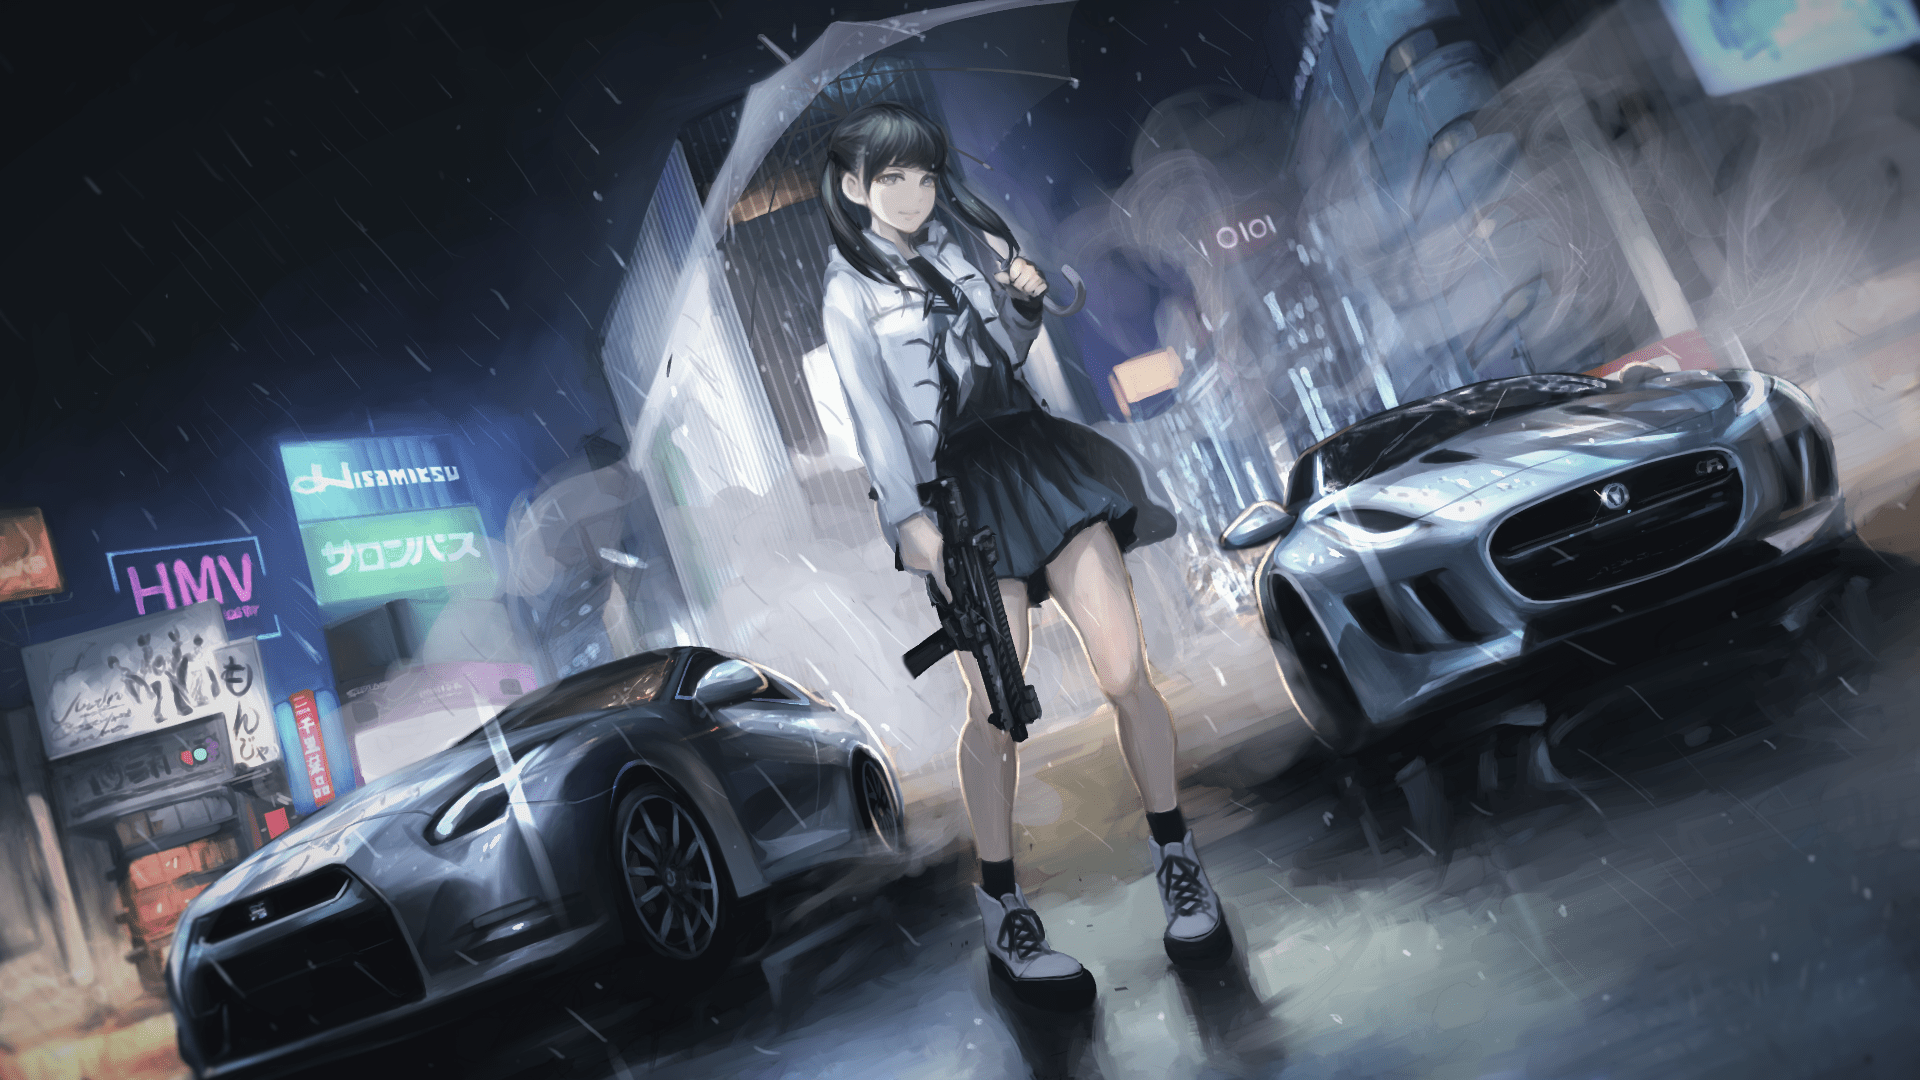 Anime Girl With Car Wallpapers - Top Free Anime Girl With Car ...